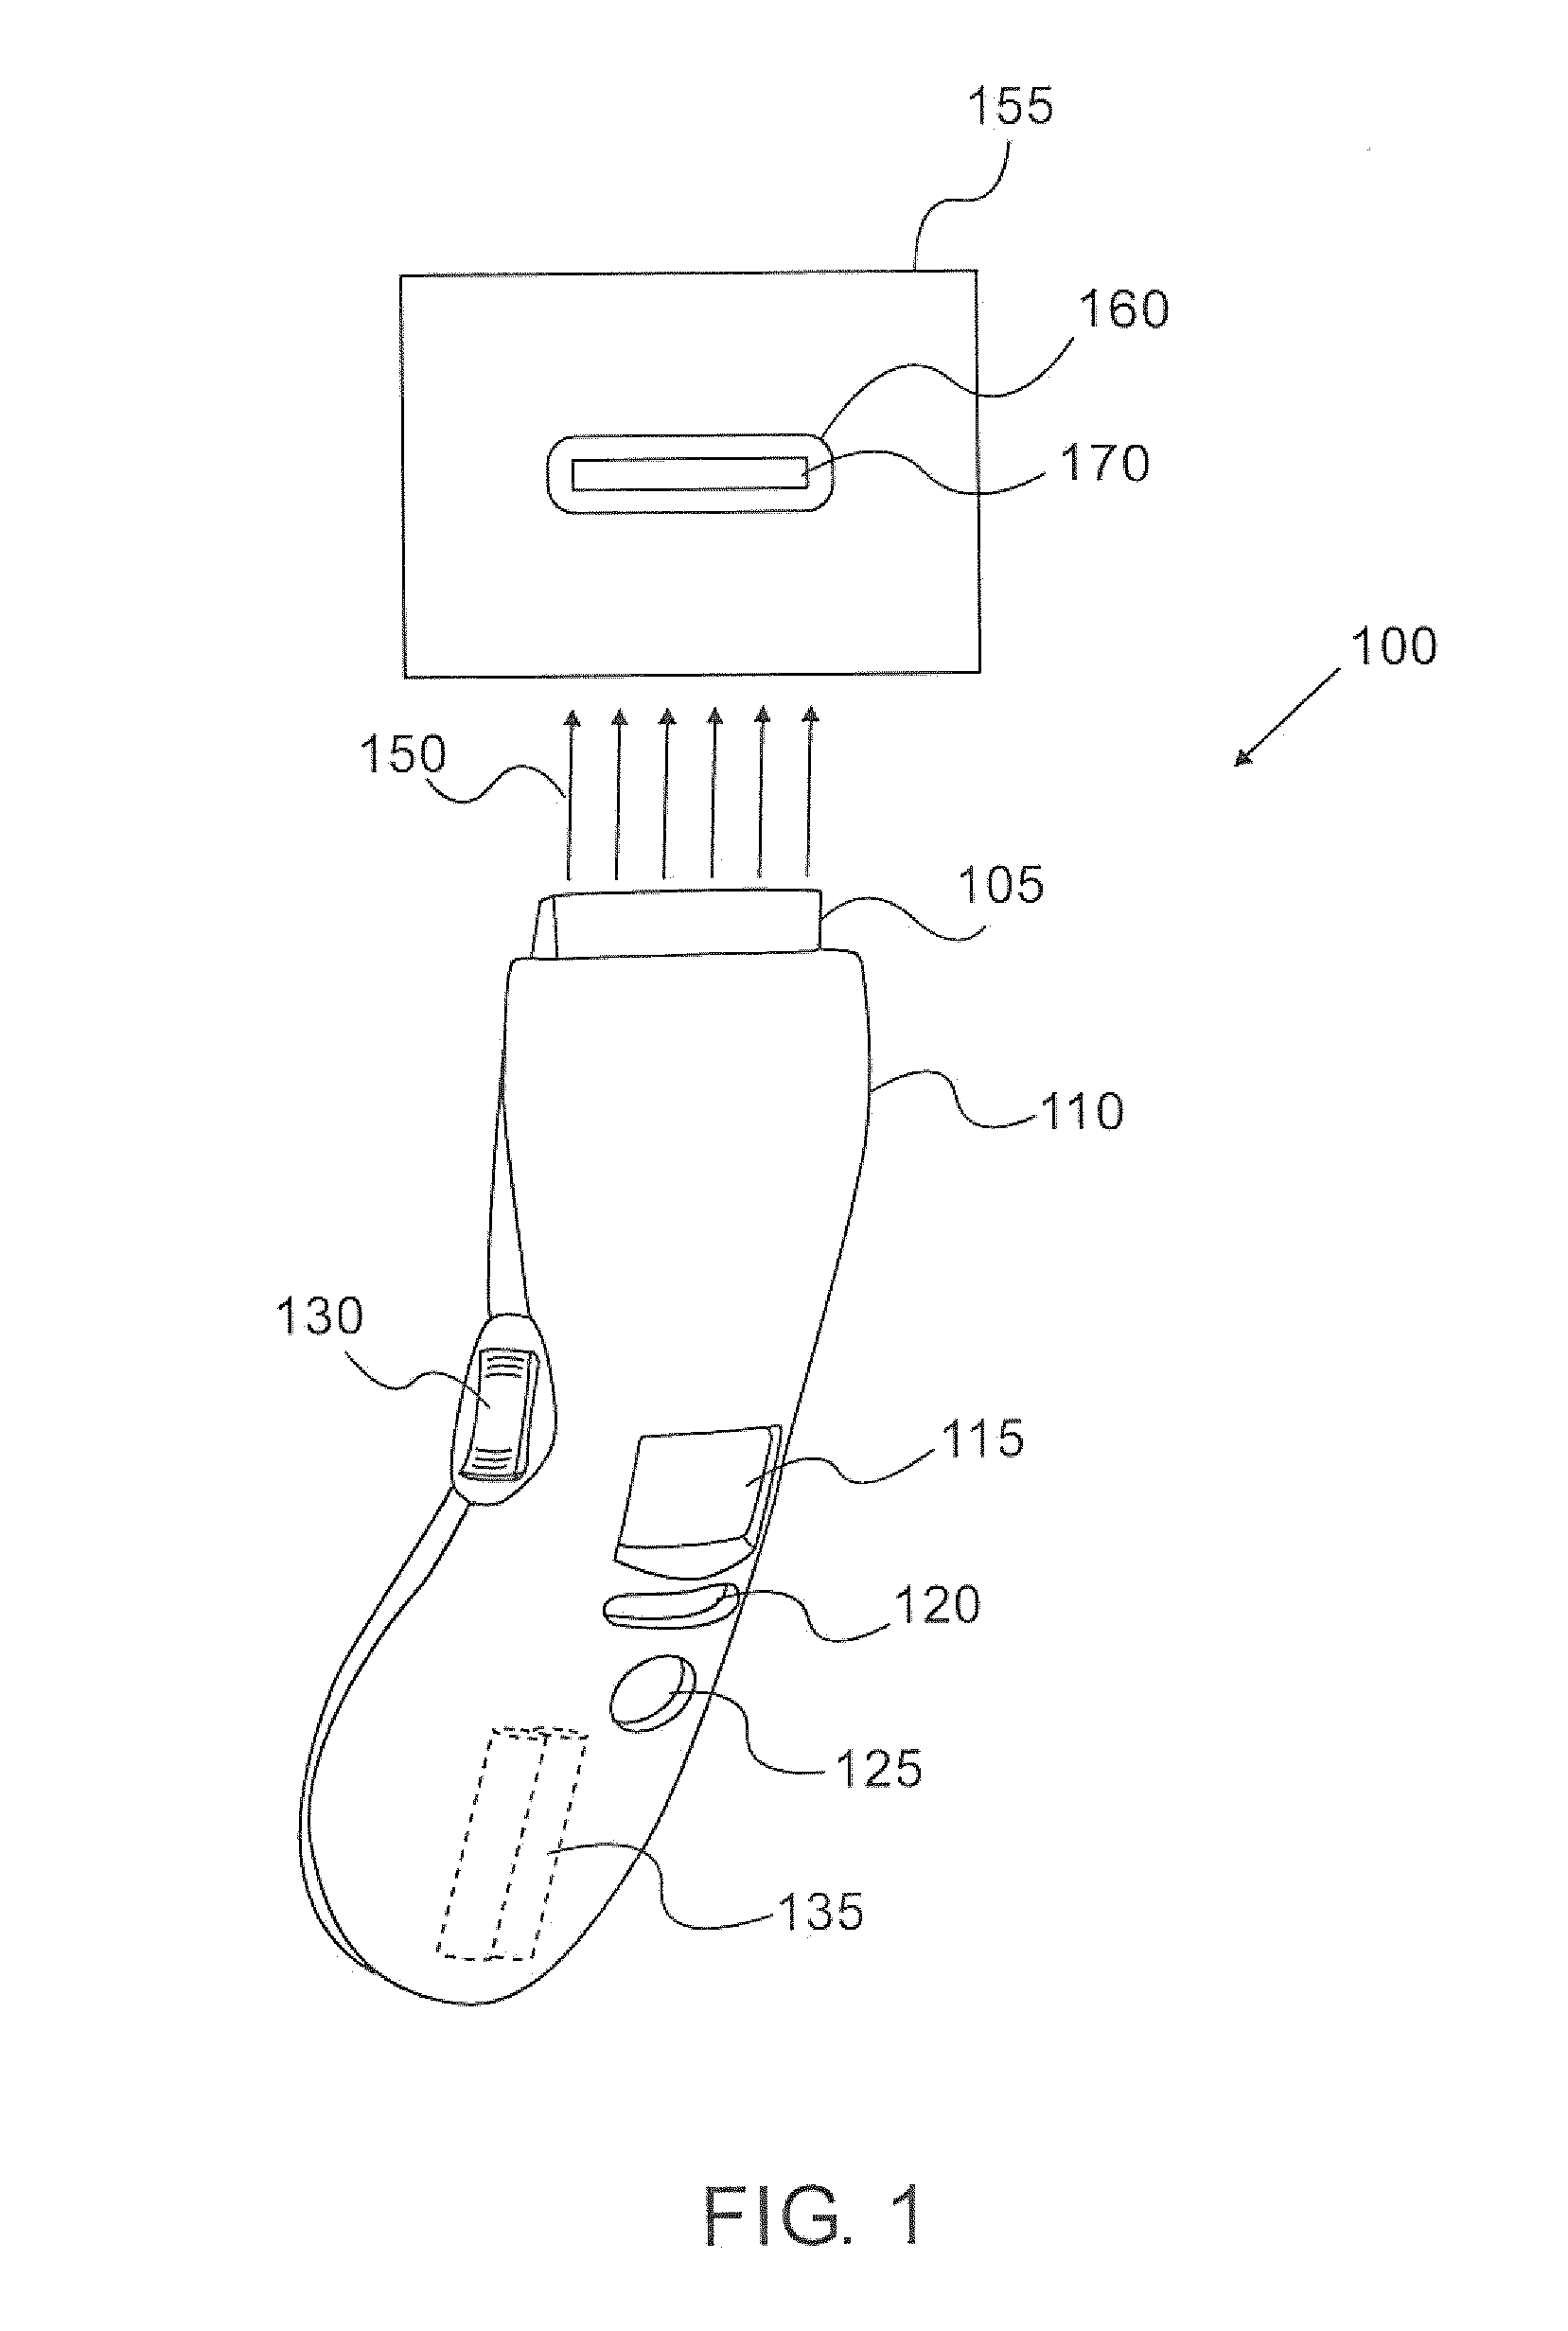 Handheld low-level laser therapy apparatus